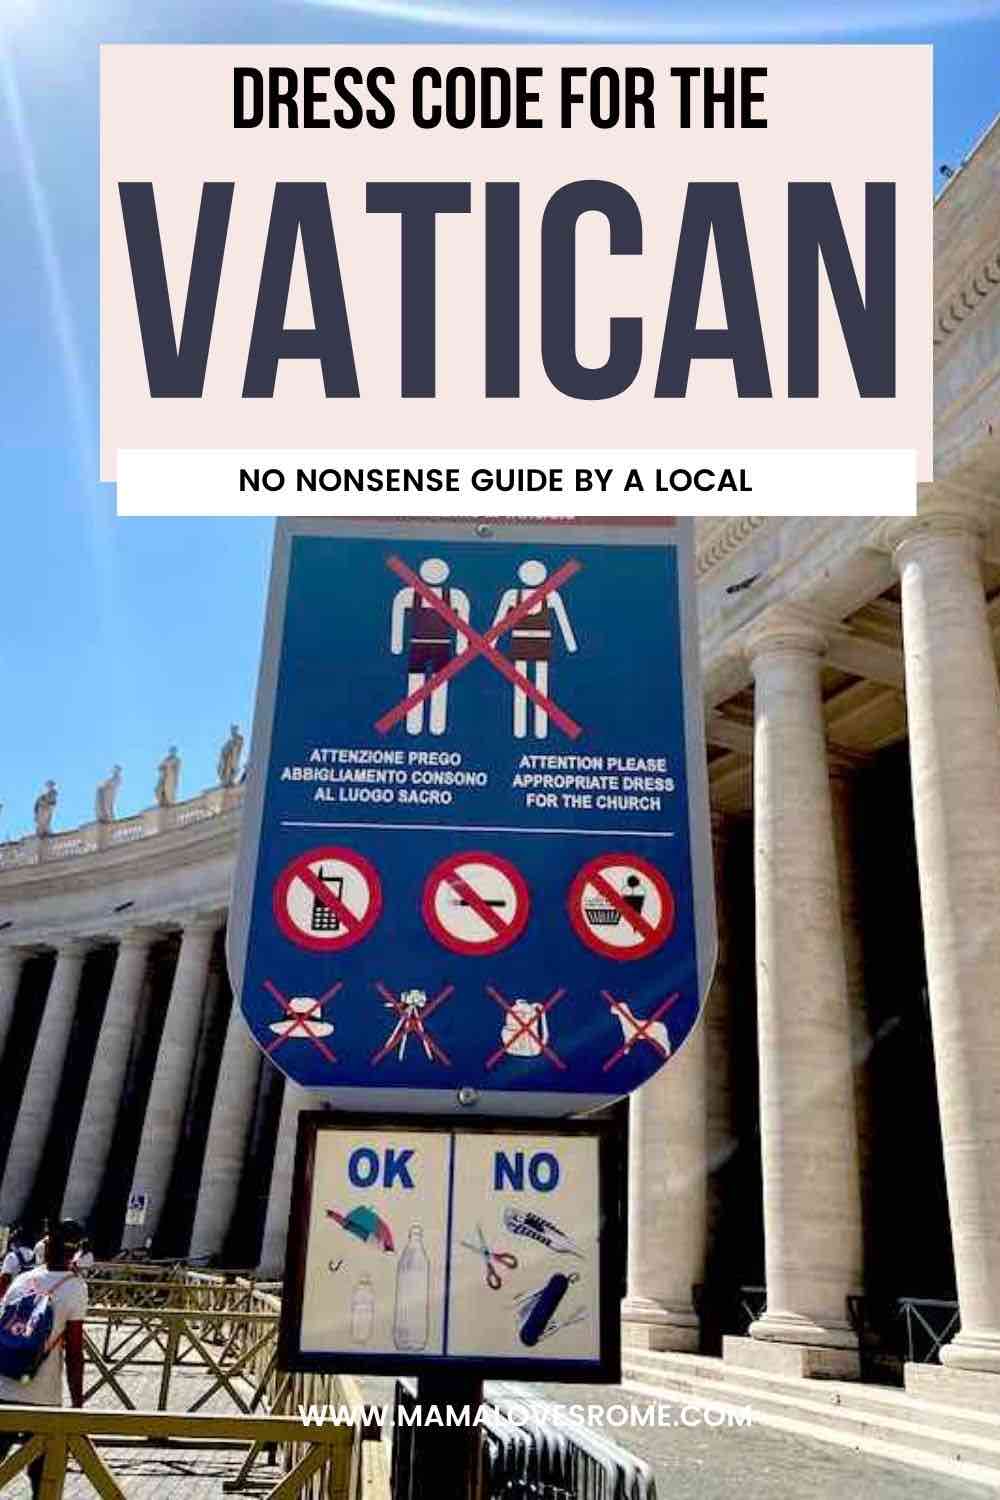 official sign with Vatican dress code in Vatican with and overlay text: Dress code for the Vatican, no nonsense guide by a local 